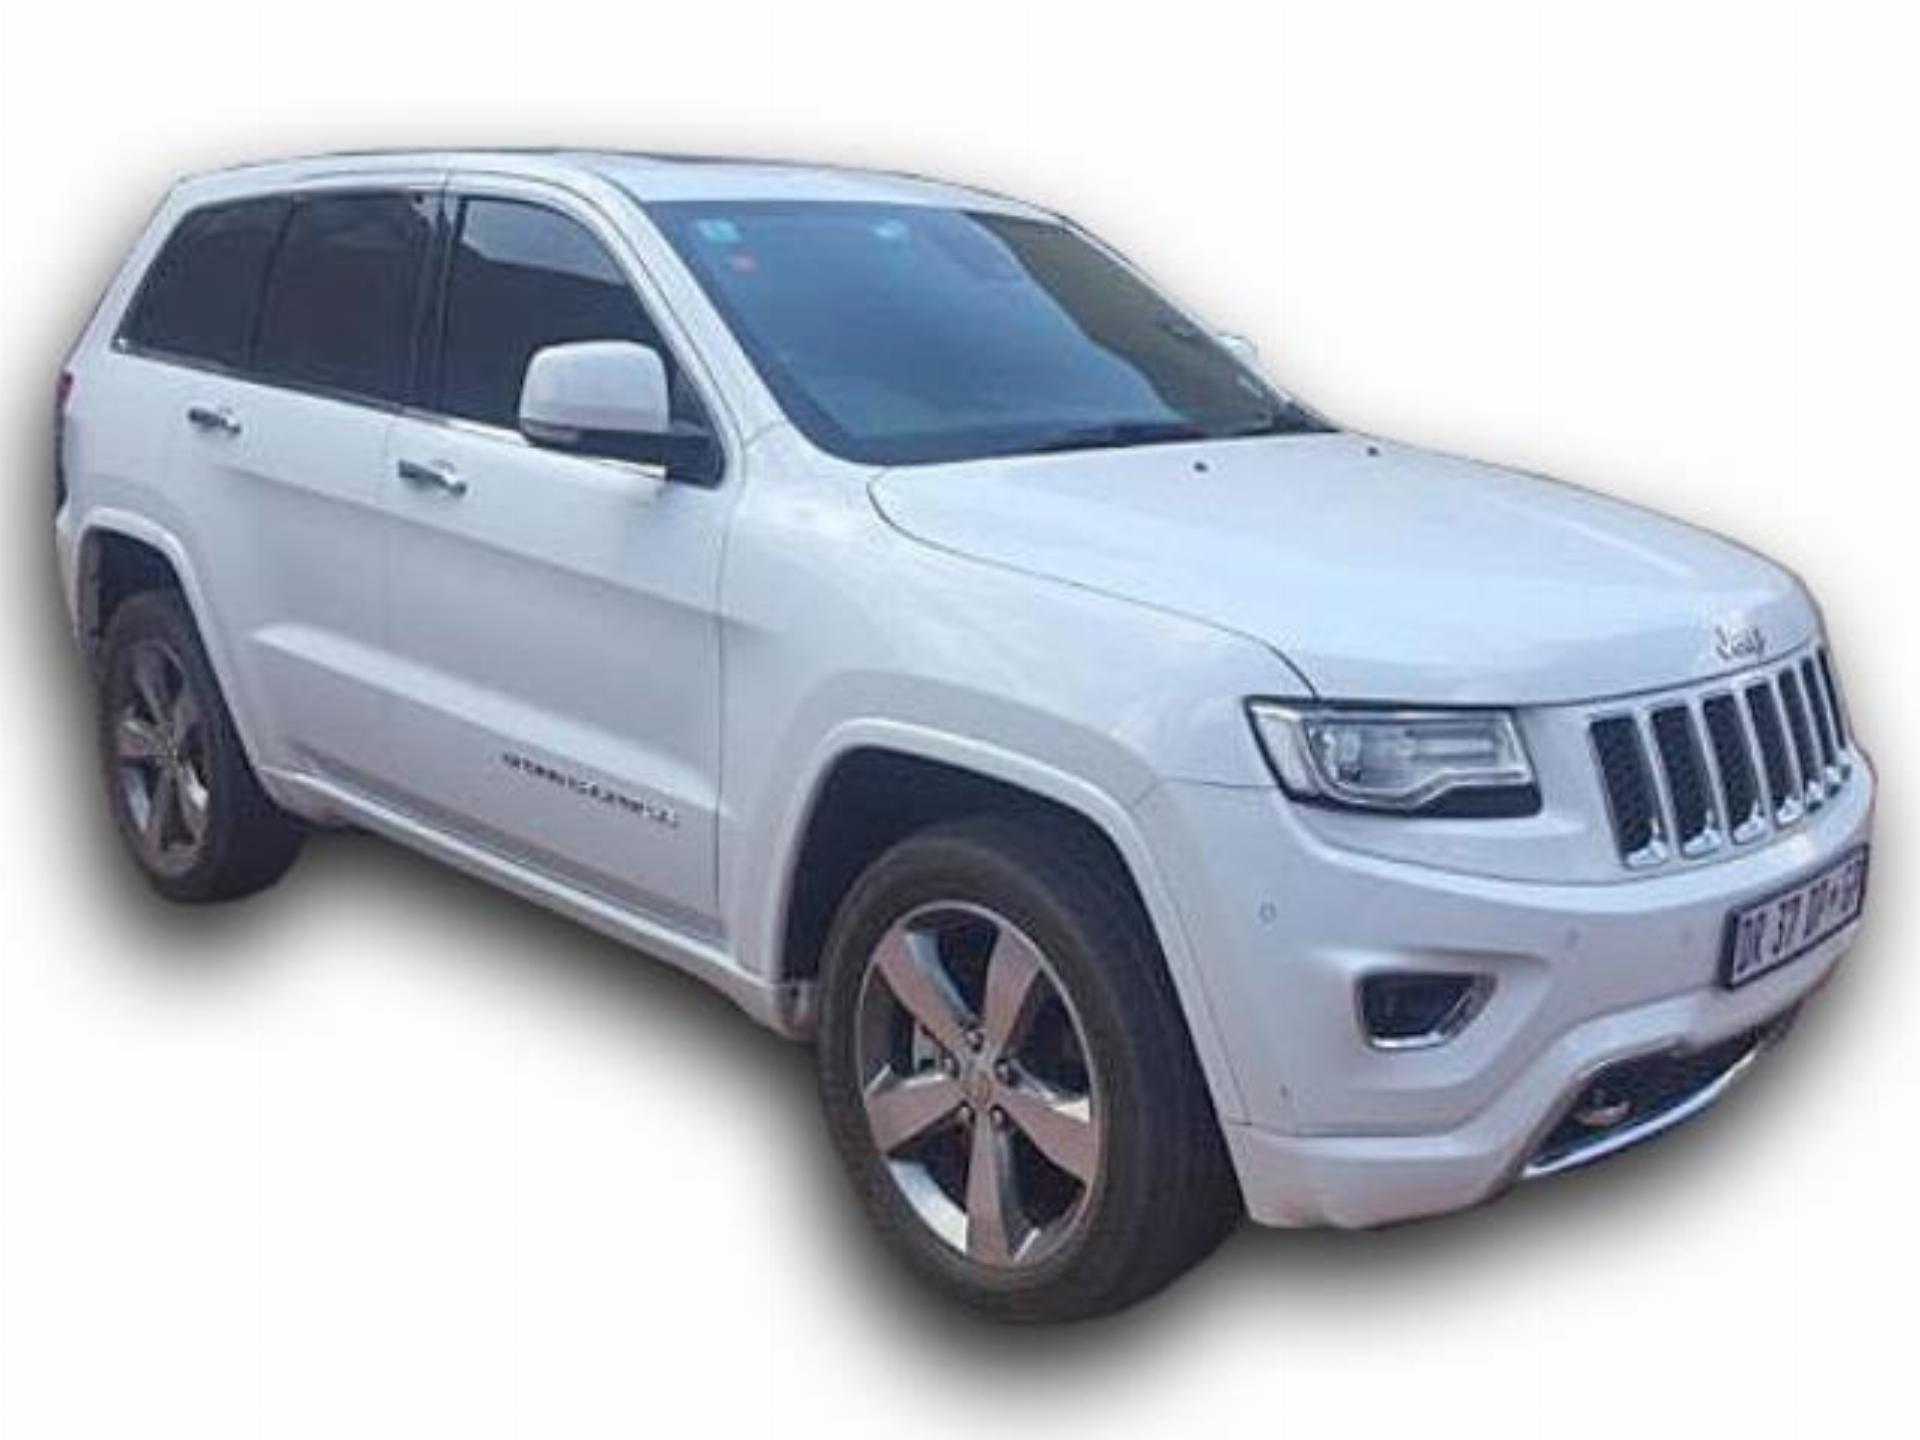 Jeep Grand Cherokee 3.6L Overland Petrol With Adg